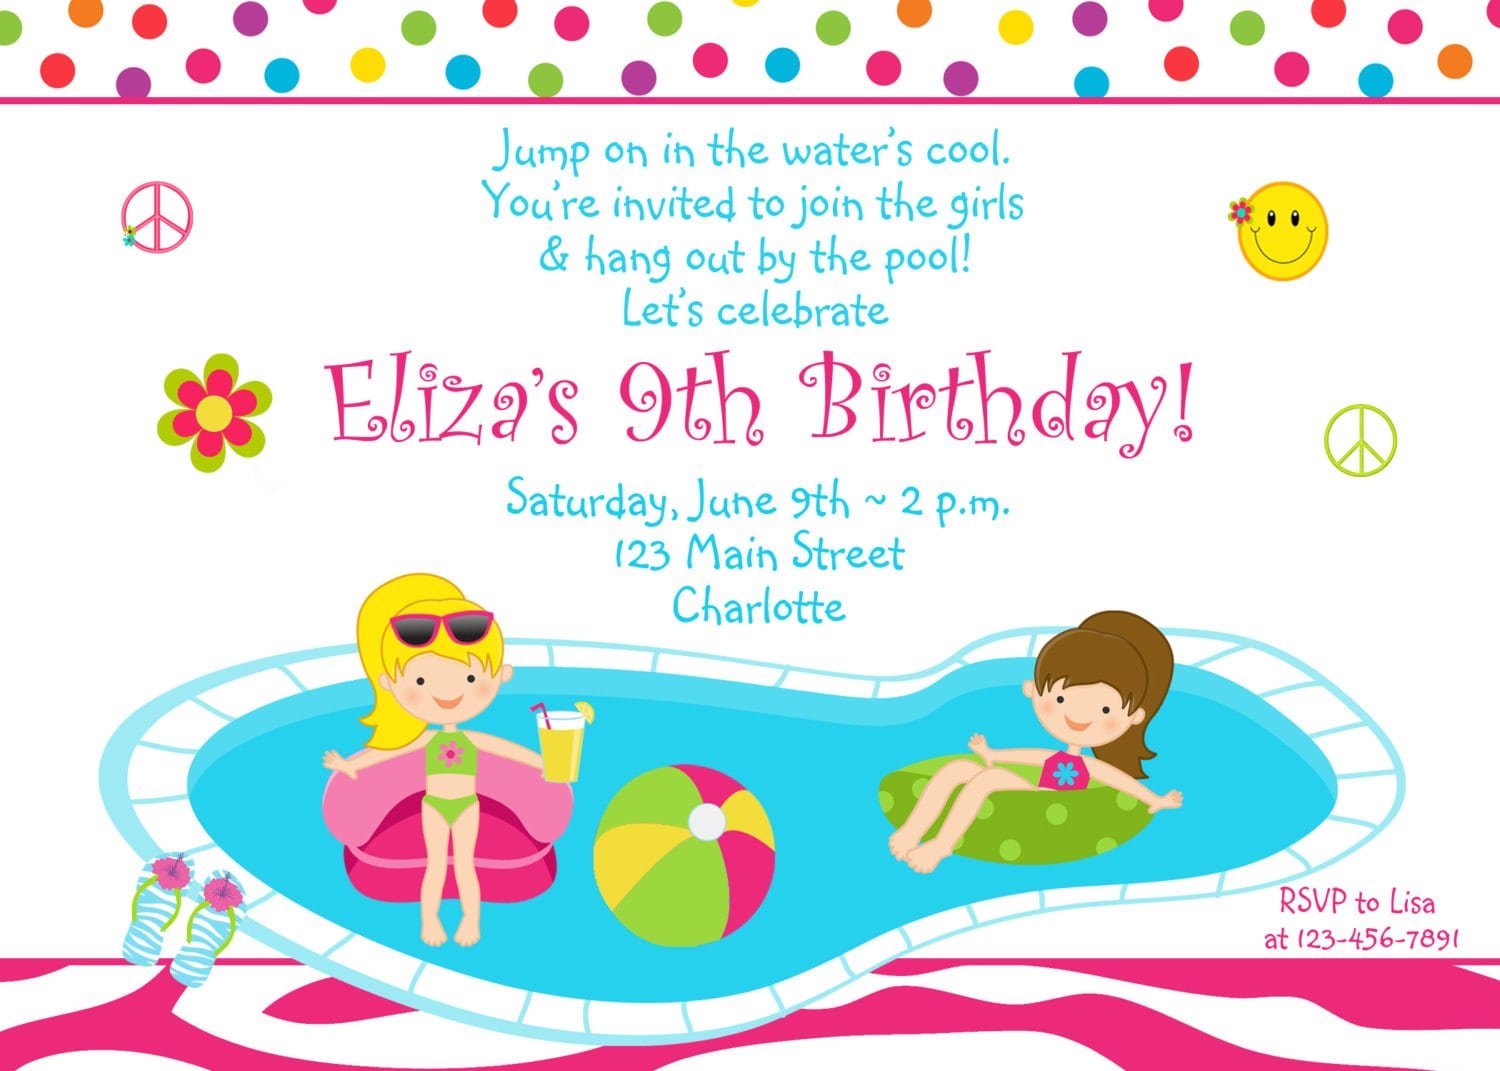 New Pool Party Invitation As An Extra Ideas About Unique Party